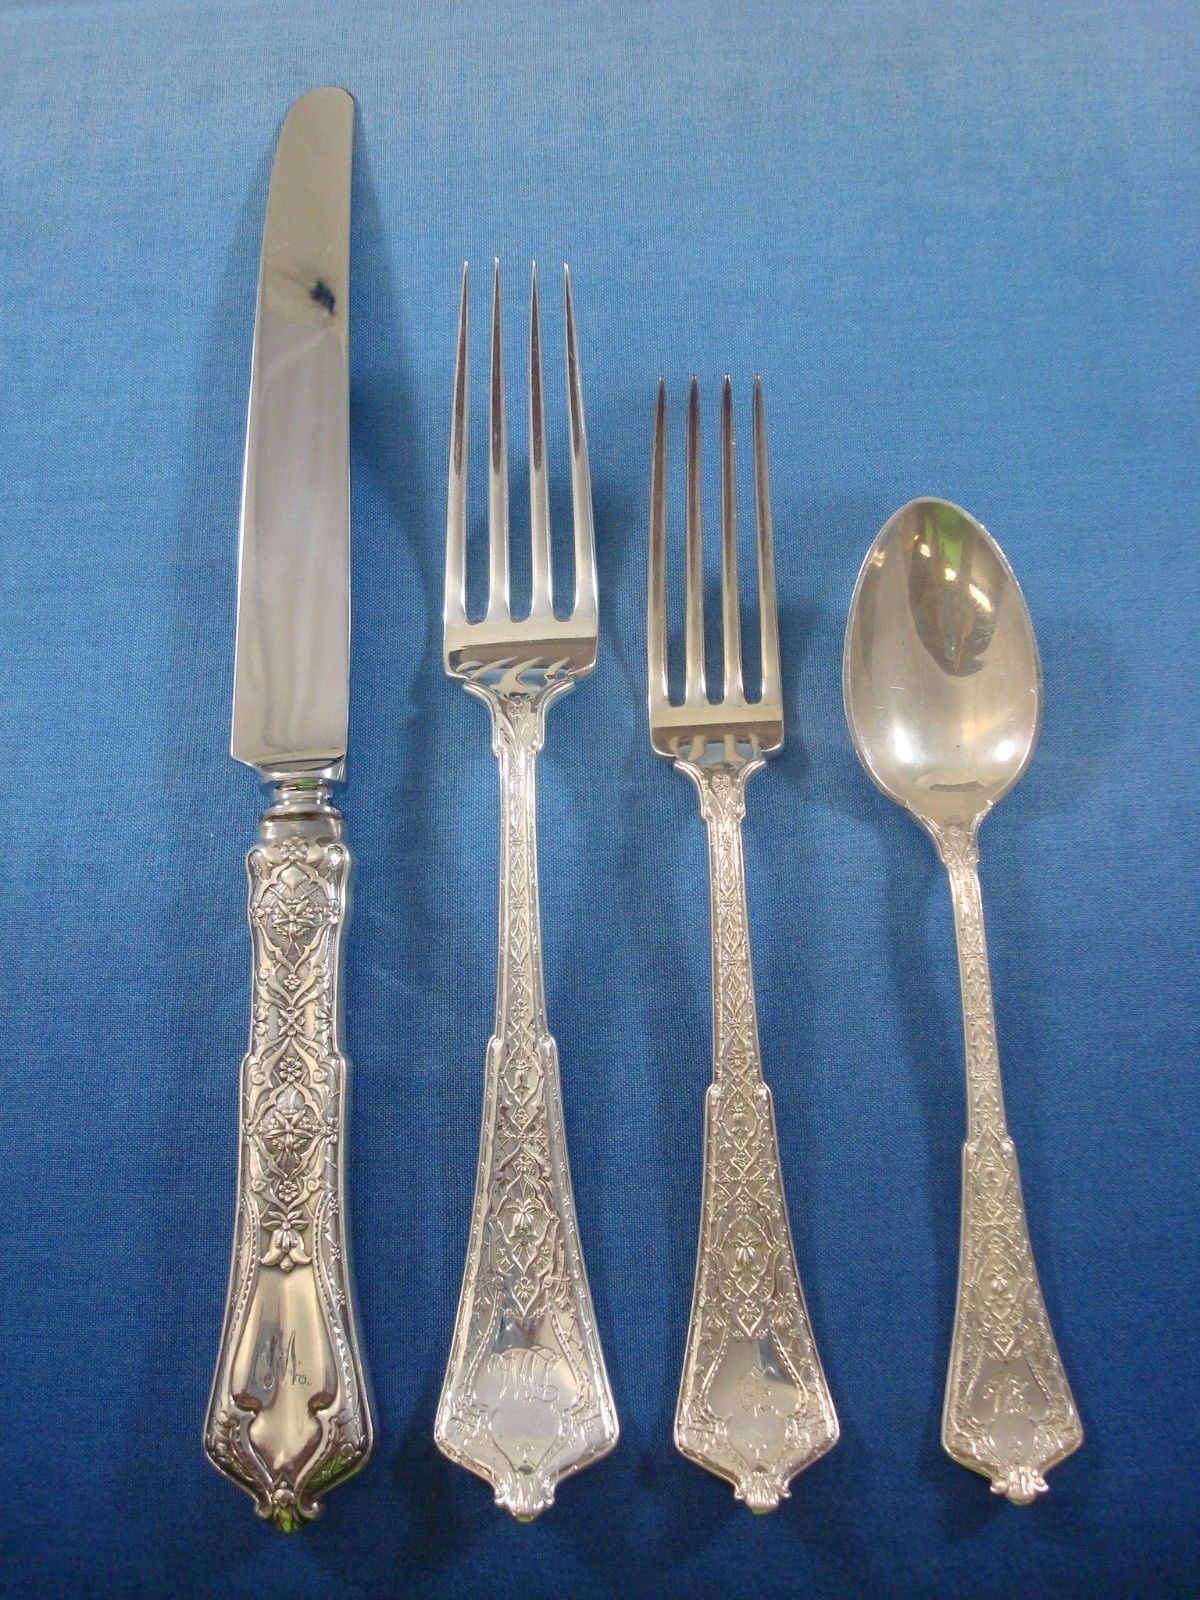 American Persian by Tiffany & Co. Sterling Silver Flatware Service Set Dinner 58 Pieces